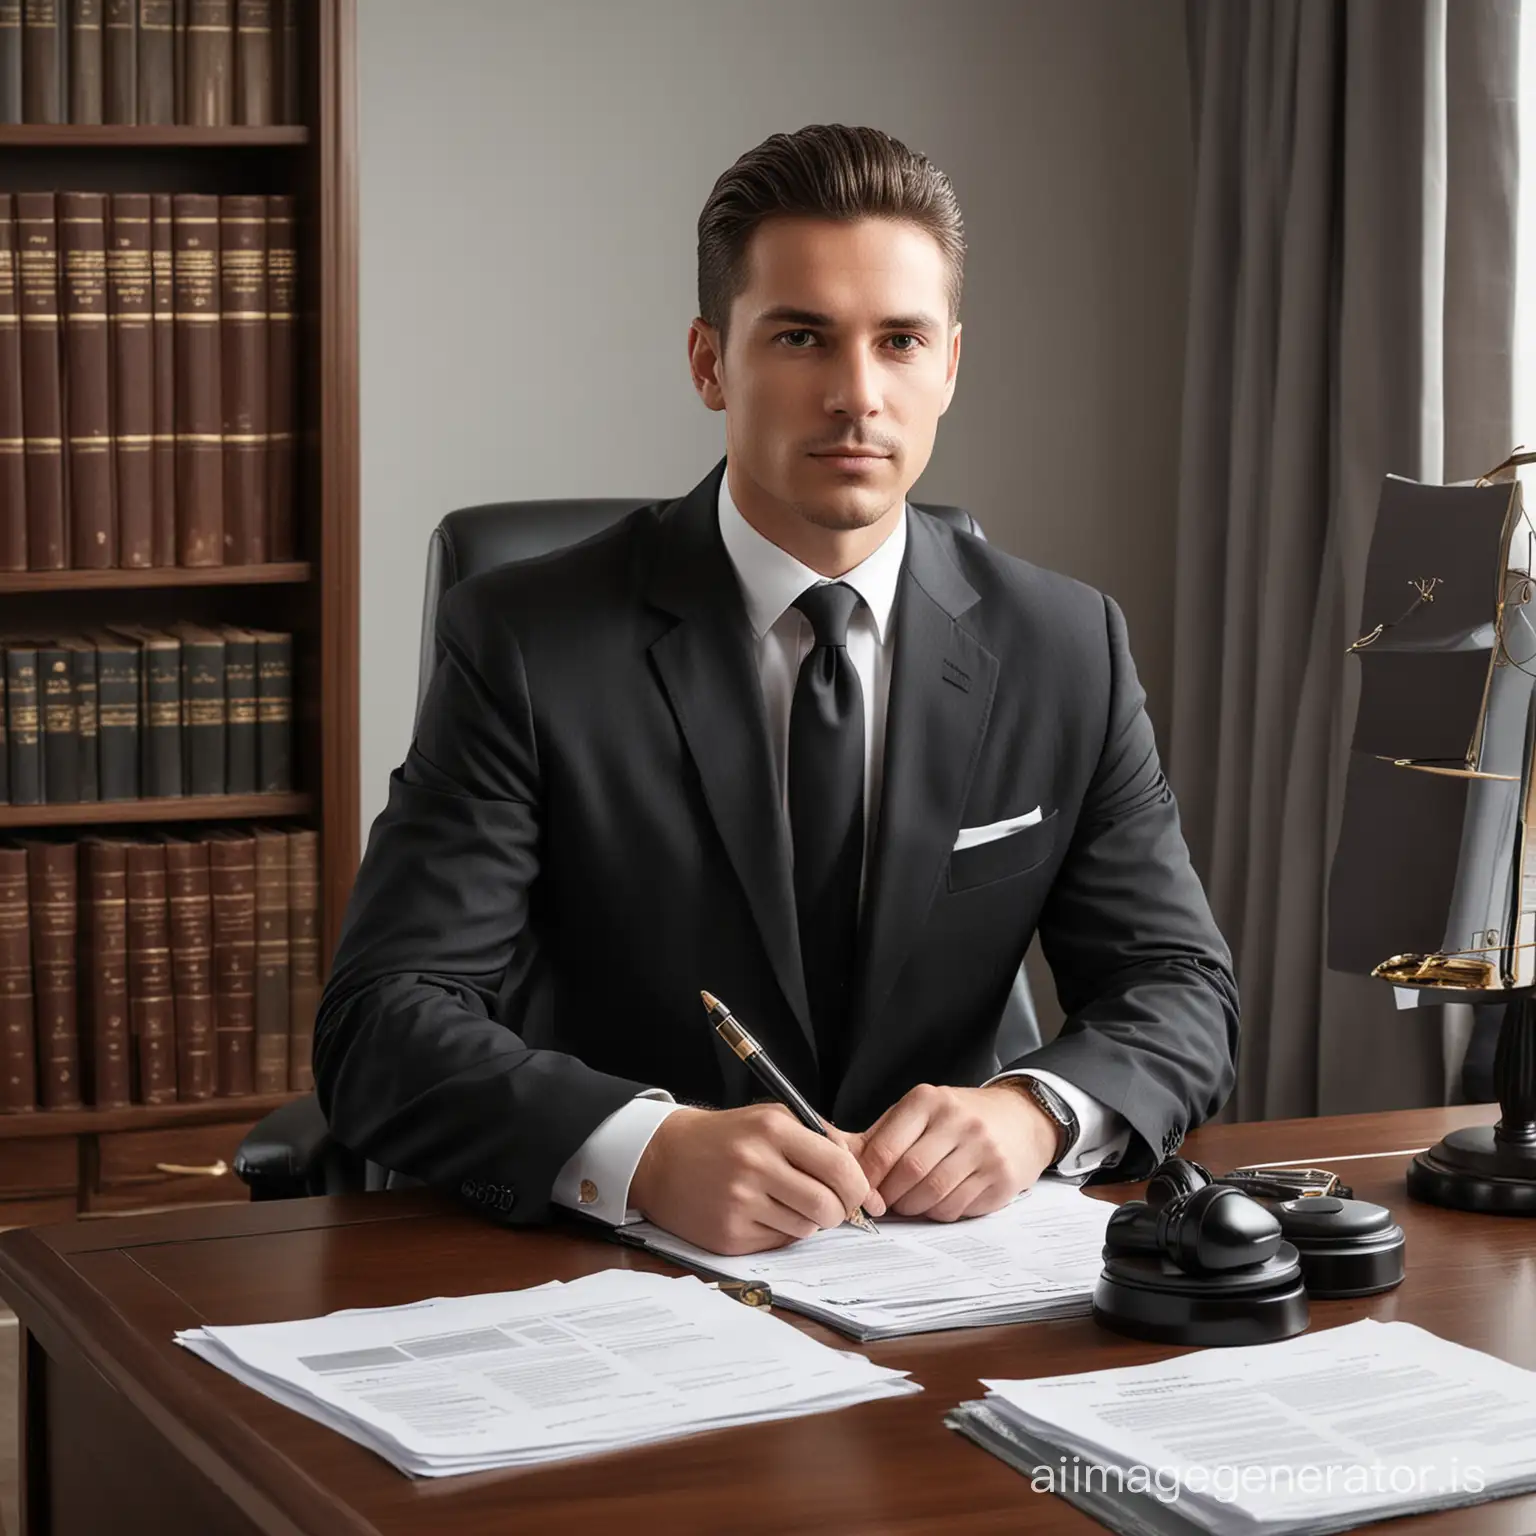 The man sitting at his personal desk is a lawyer dressed in a stylish and professional suit. His appearance suggests high quality and professionalism. Attention is drawn to his confident posture and self-assured gaze. Next to him on the table are documents and legal materials, indicating his deep knowledge and experience in the field of jurisprudence. His workspace is organized and neat, reflecting his discipline and attention to detail. Overall, his appearance and working environment create the impression of a top-notch specialist ready to tackle complex legal issues and tasks.